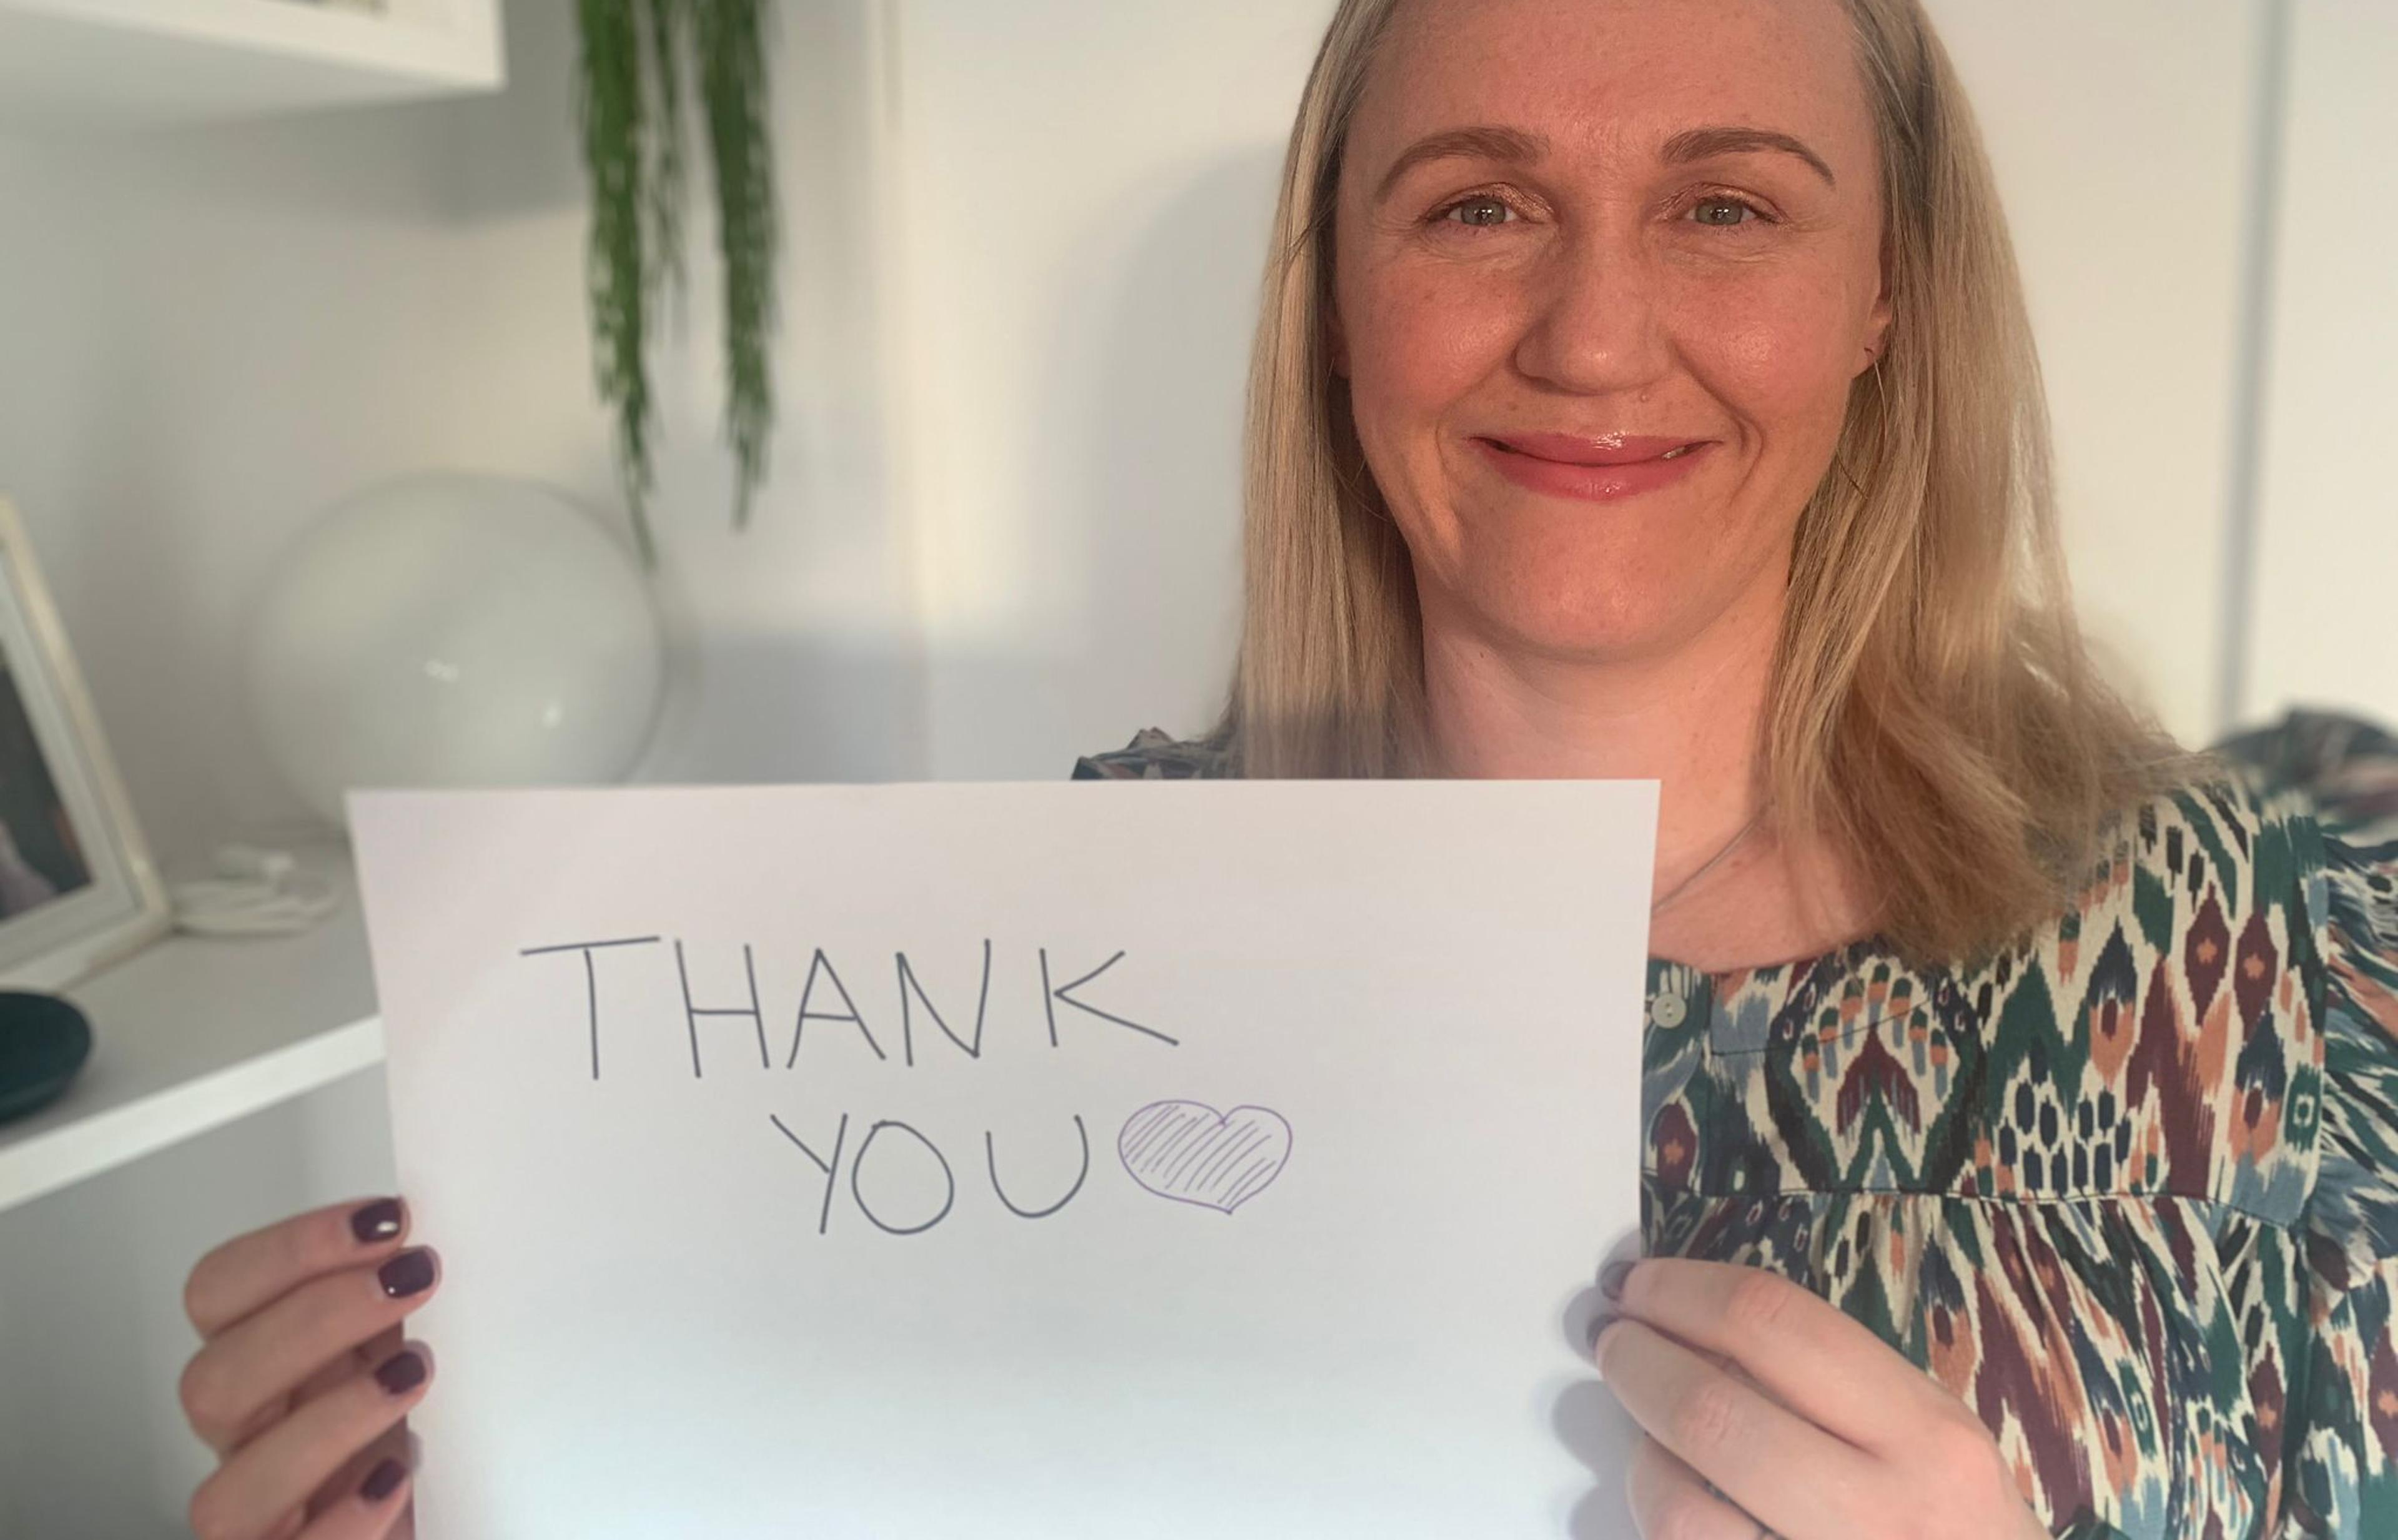 A blonde-haired lady - Weston Park Cancer Charity CEO, Emma Clarke - sits smiling while holding up a white piece of paper which reads "Thank you" with a heart drawn afterwards.